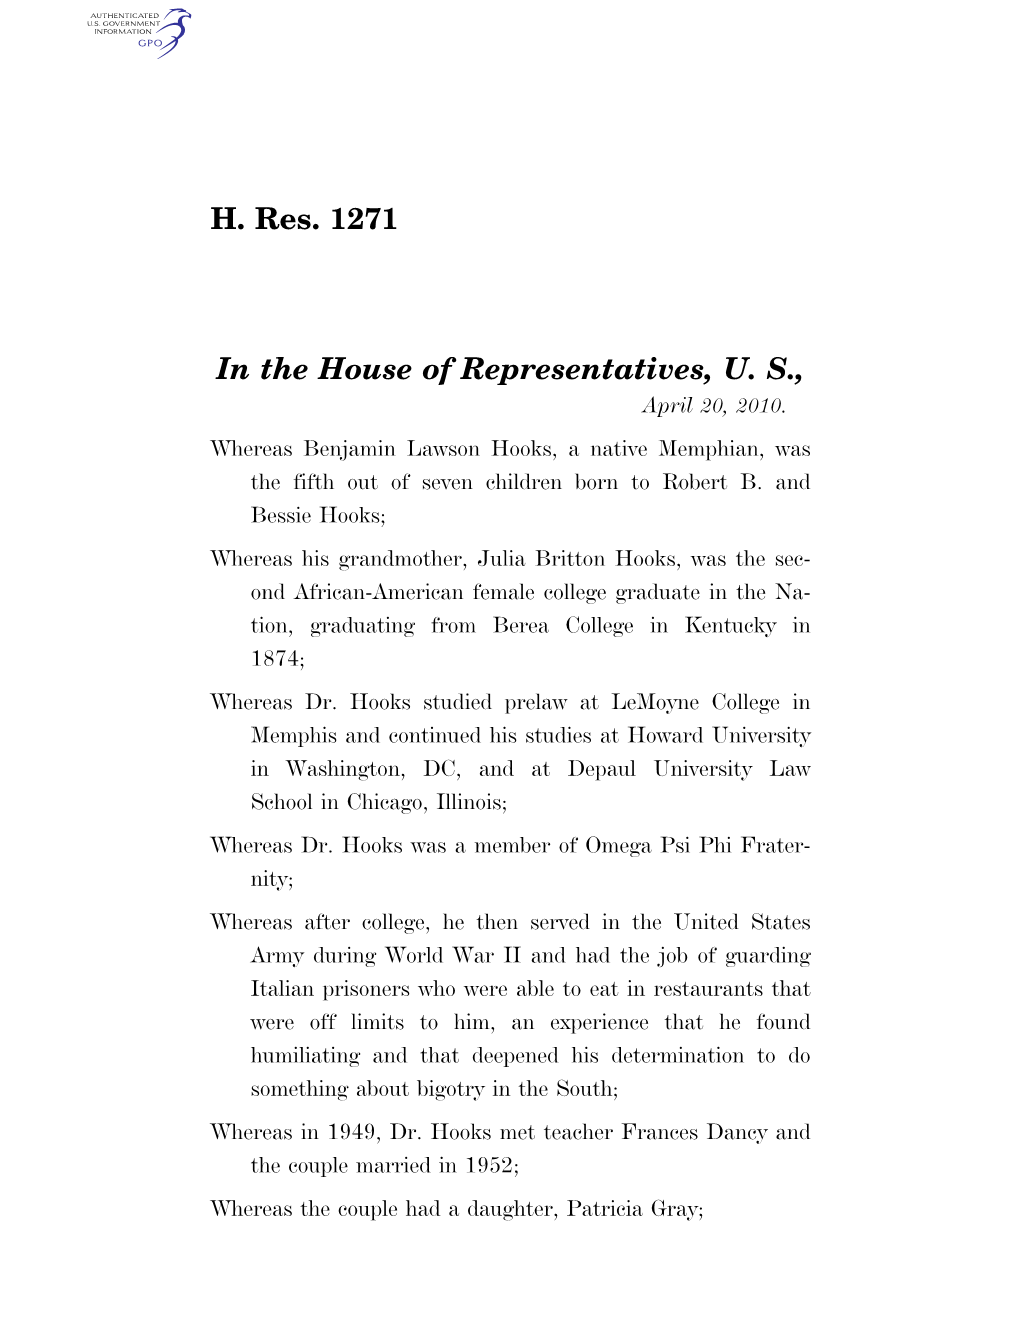 H. Res. 1271 in the House of Representatives, U